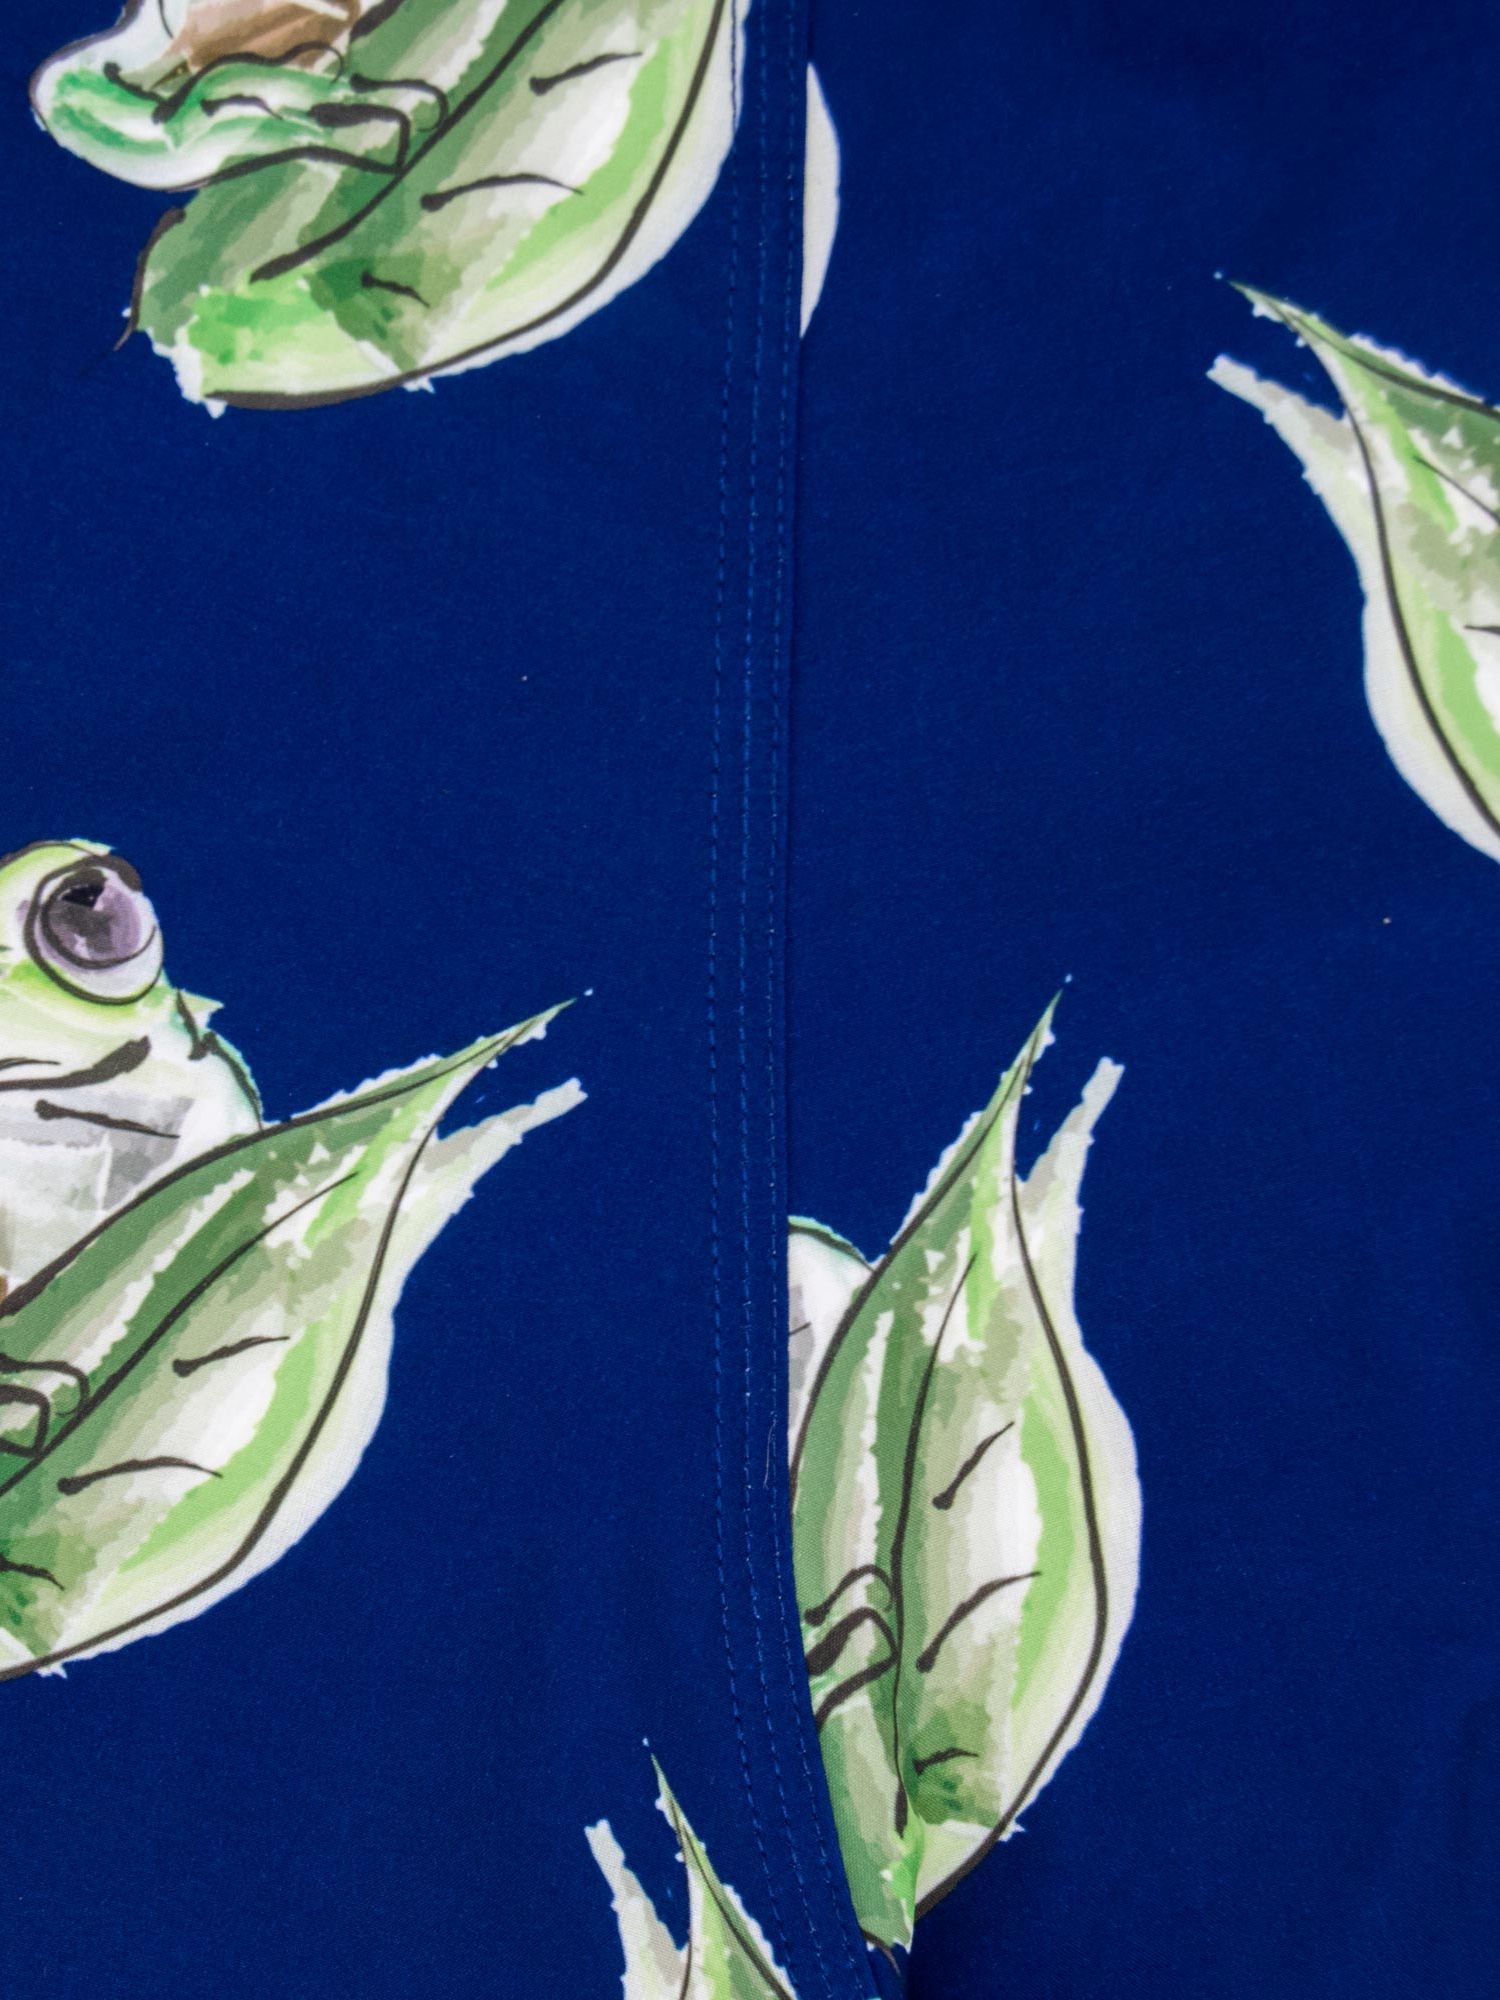 Buy Randy Cow Frogs Swim Shorts with Waterproof Pocket, Navy/Multi Online at johnlewis.com